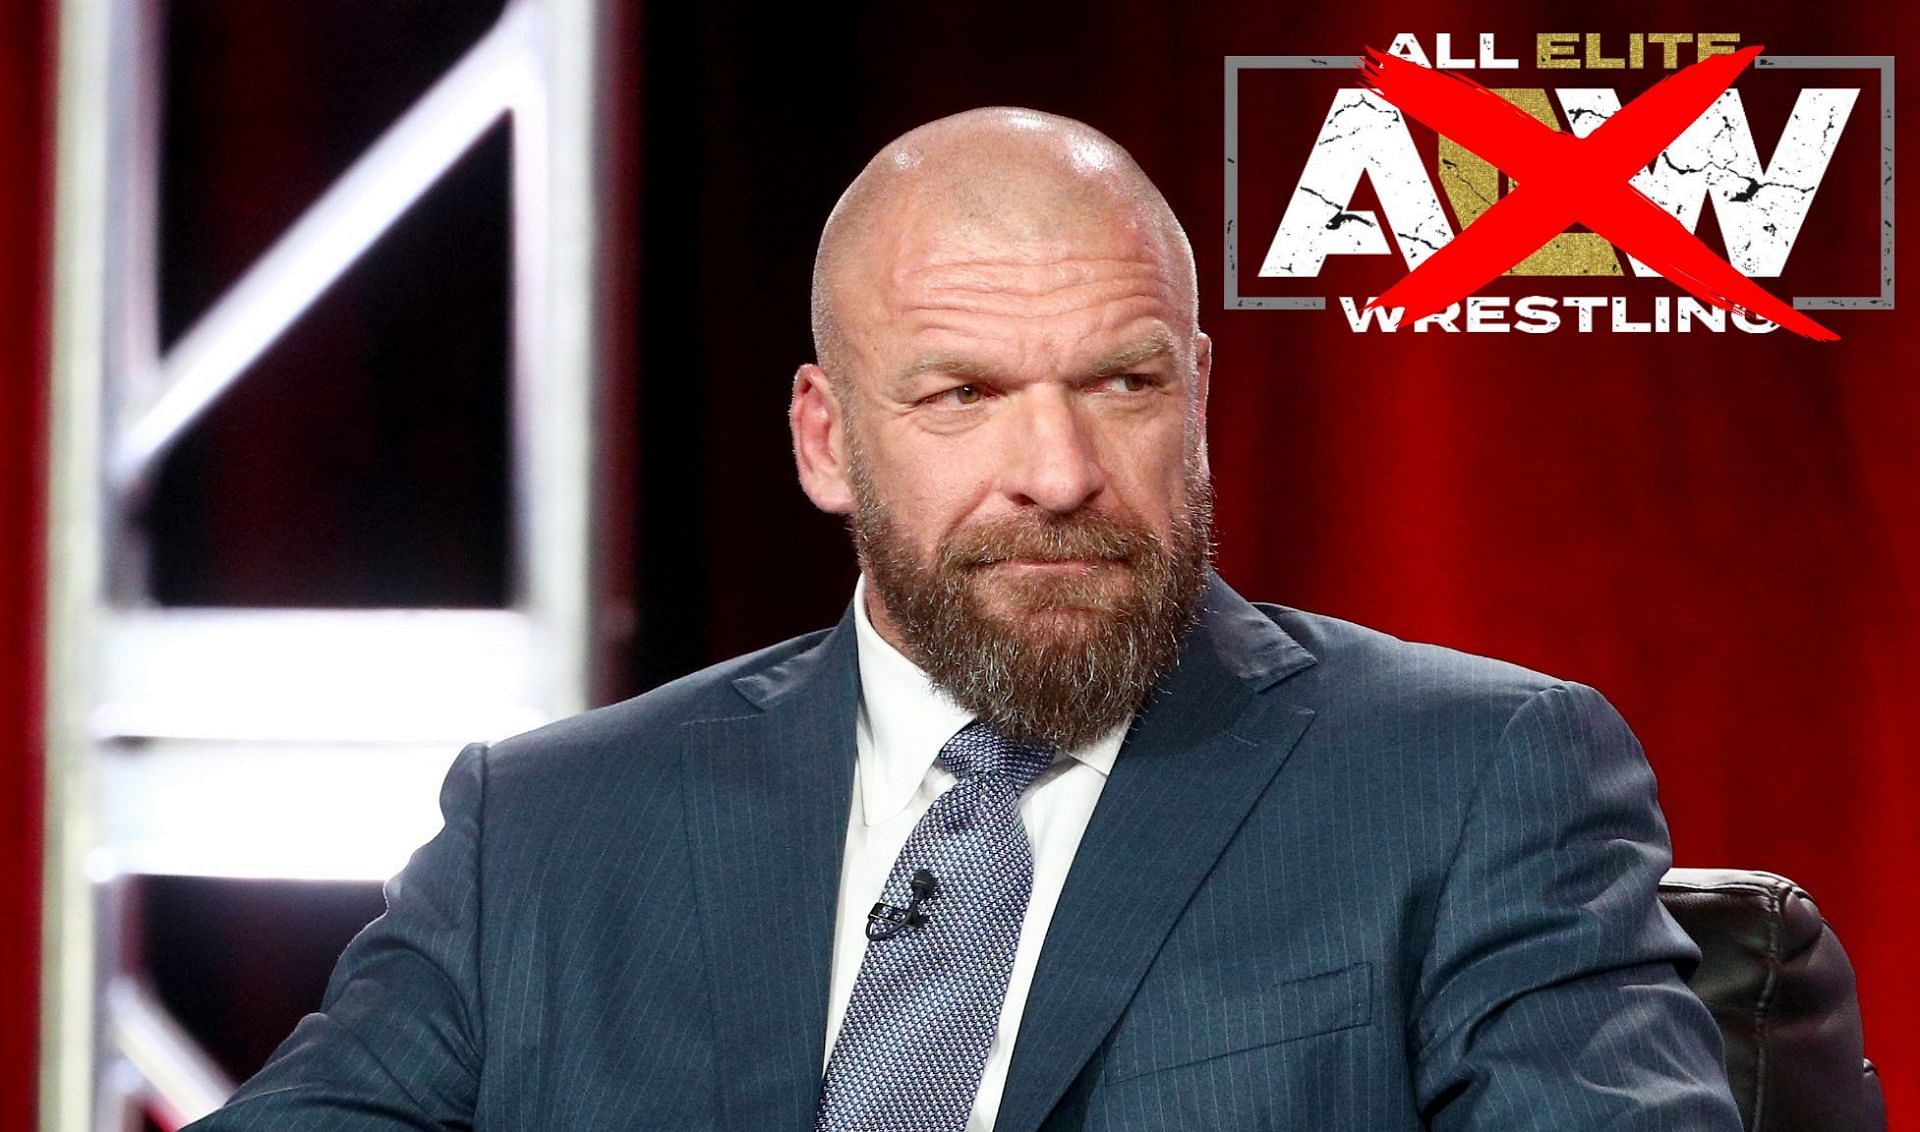 Does Triple H has more influence over the wrestling world than fans realize?